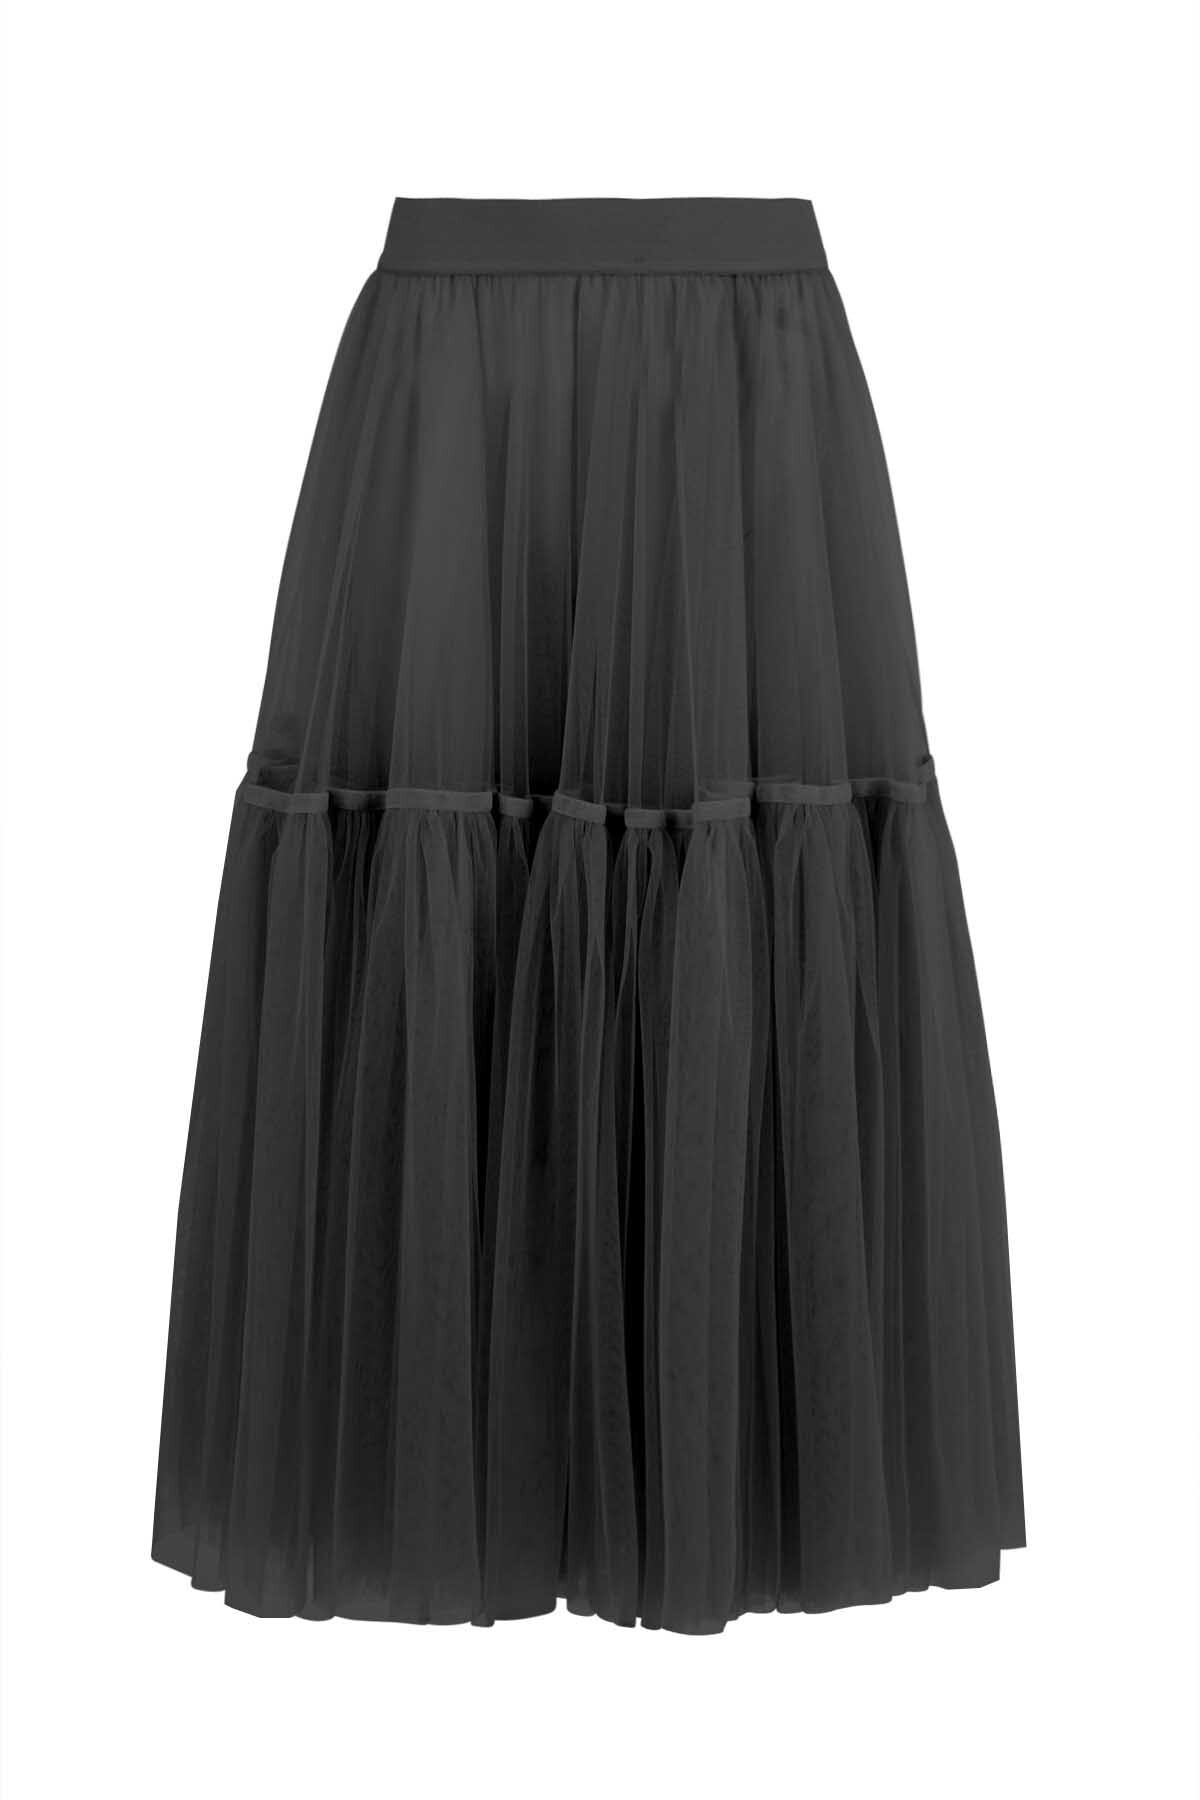 TULLEY NOT SKIRT (BLACK) - Shop by Style-Skirts : Home - TRELISE COOPER ...